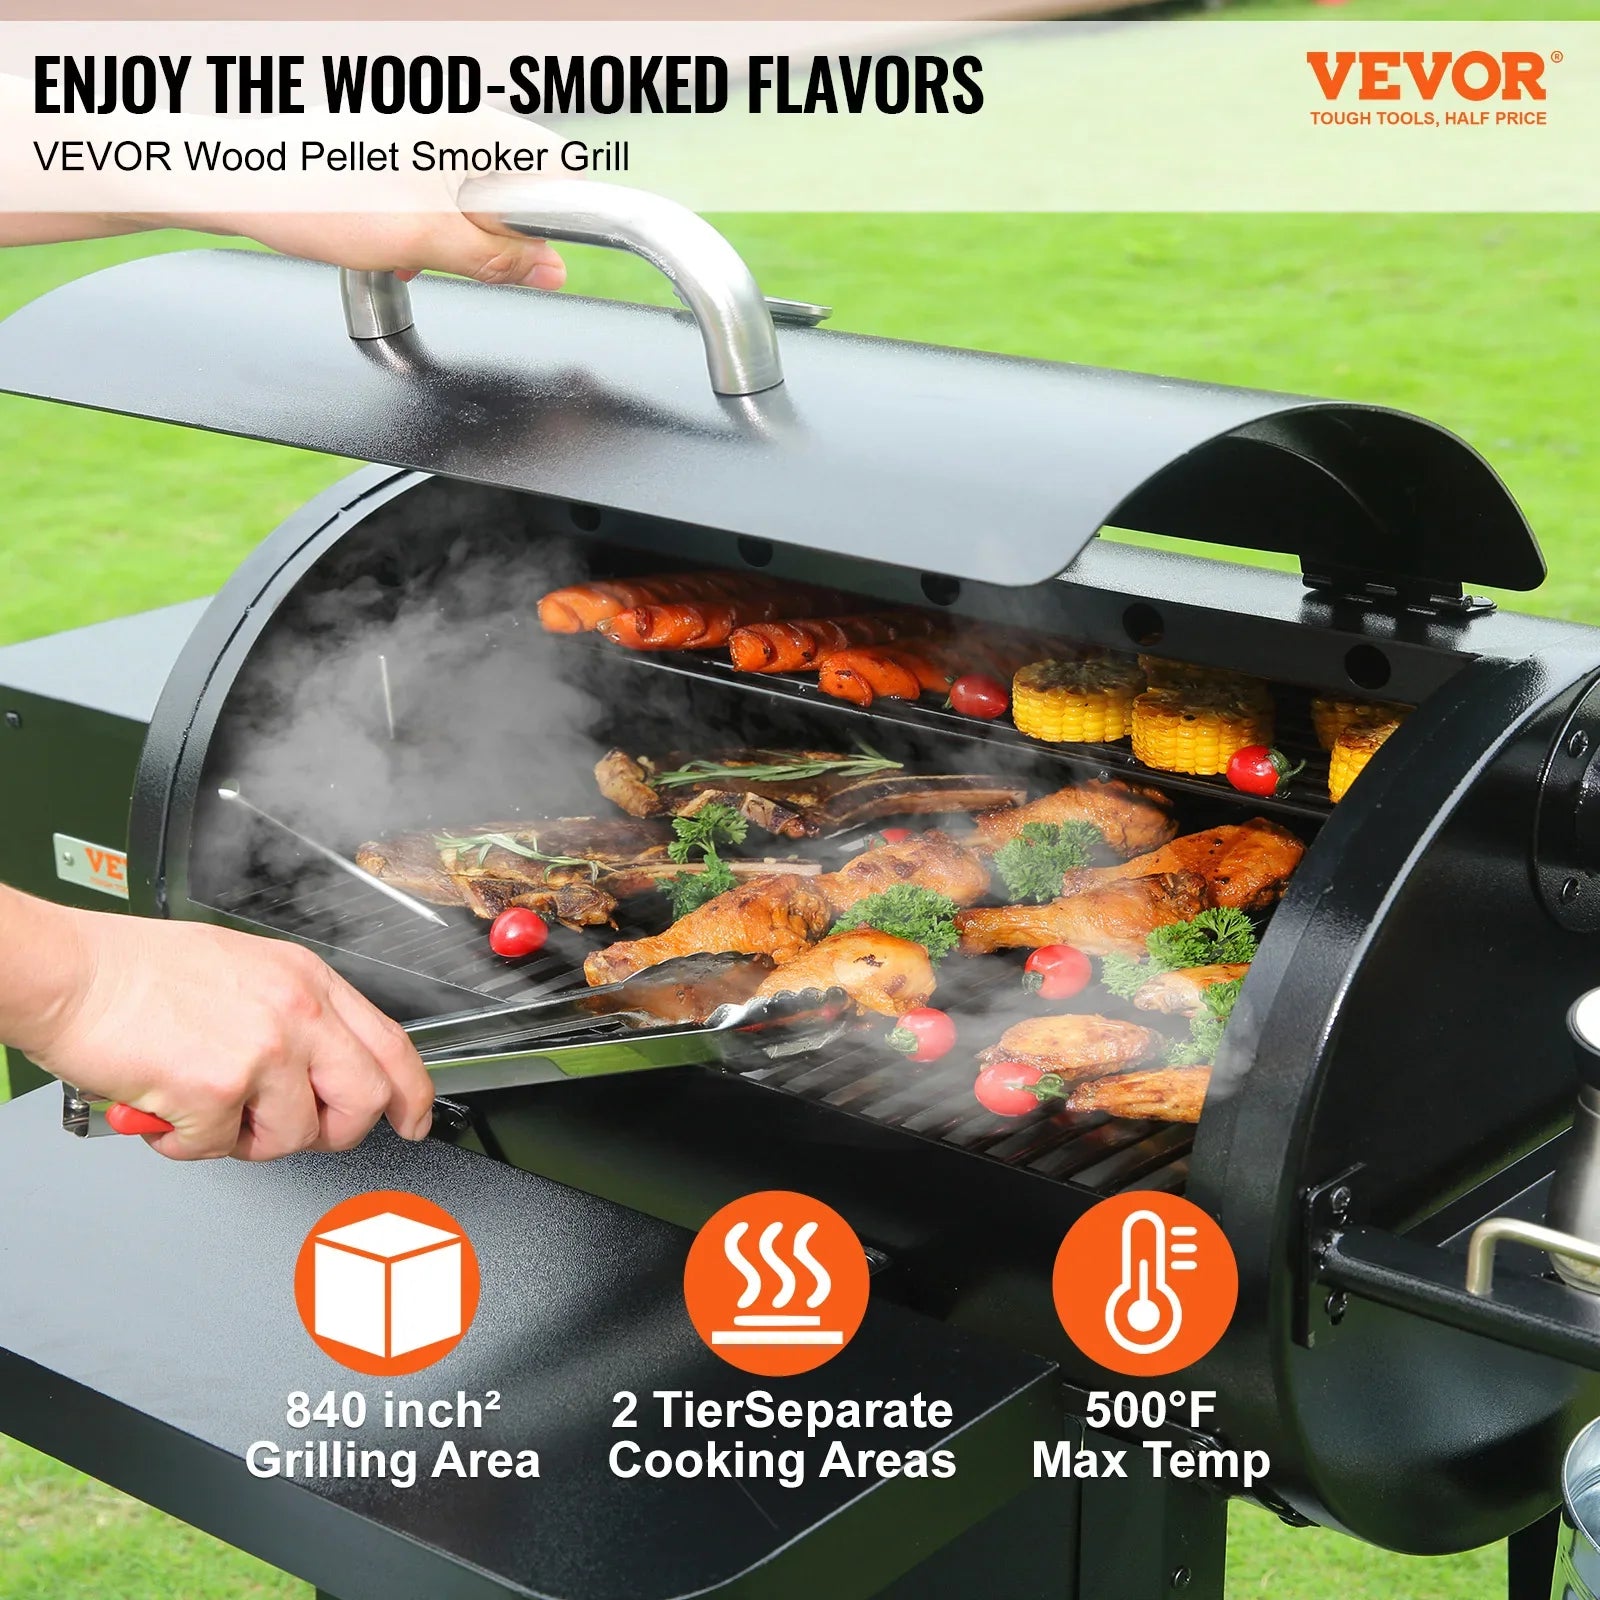 VEVOR Portable Charcoal Grill Propane Gas Grills with Cover